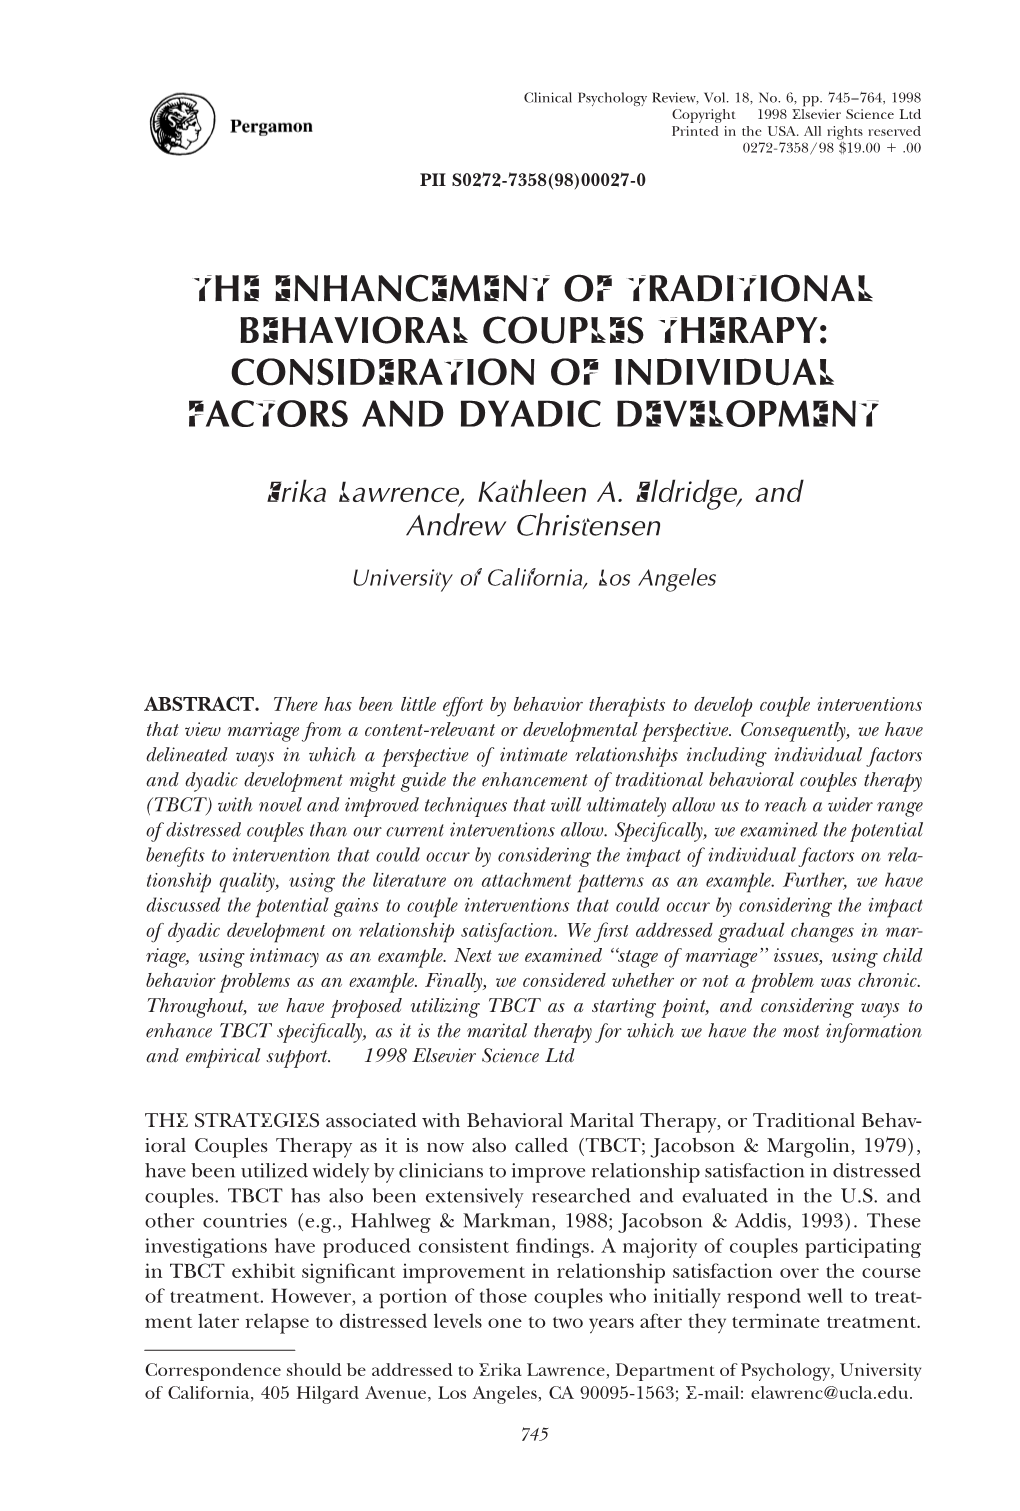 The Enhancement of Traditional Behavioral Couples Therapy: Consideration of Individual Factors and Dyadic Development